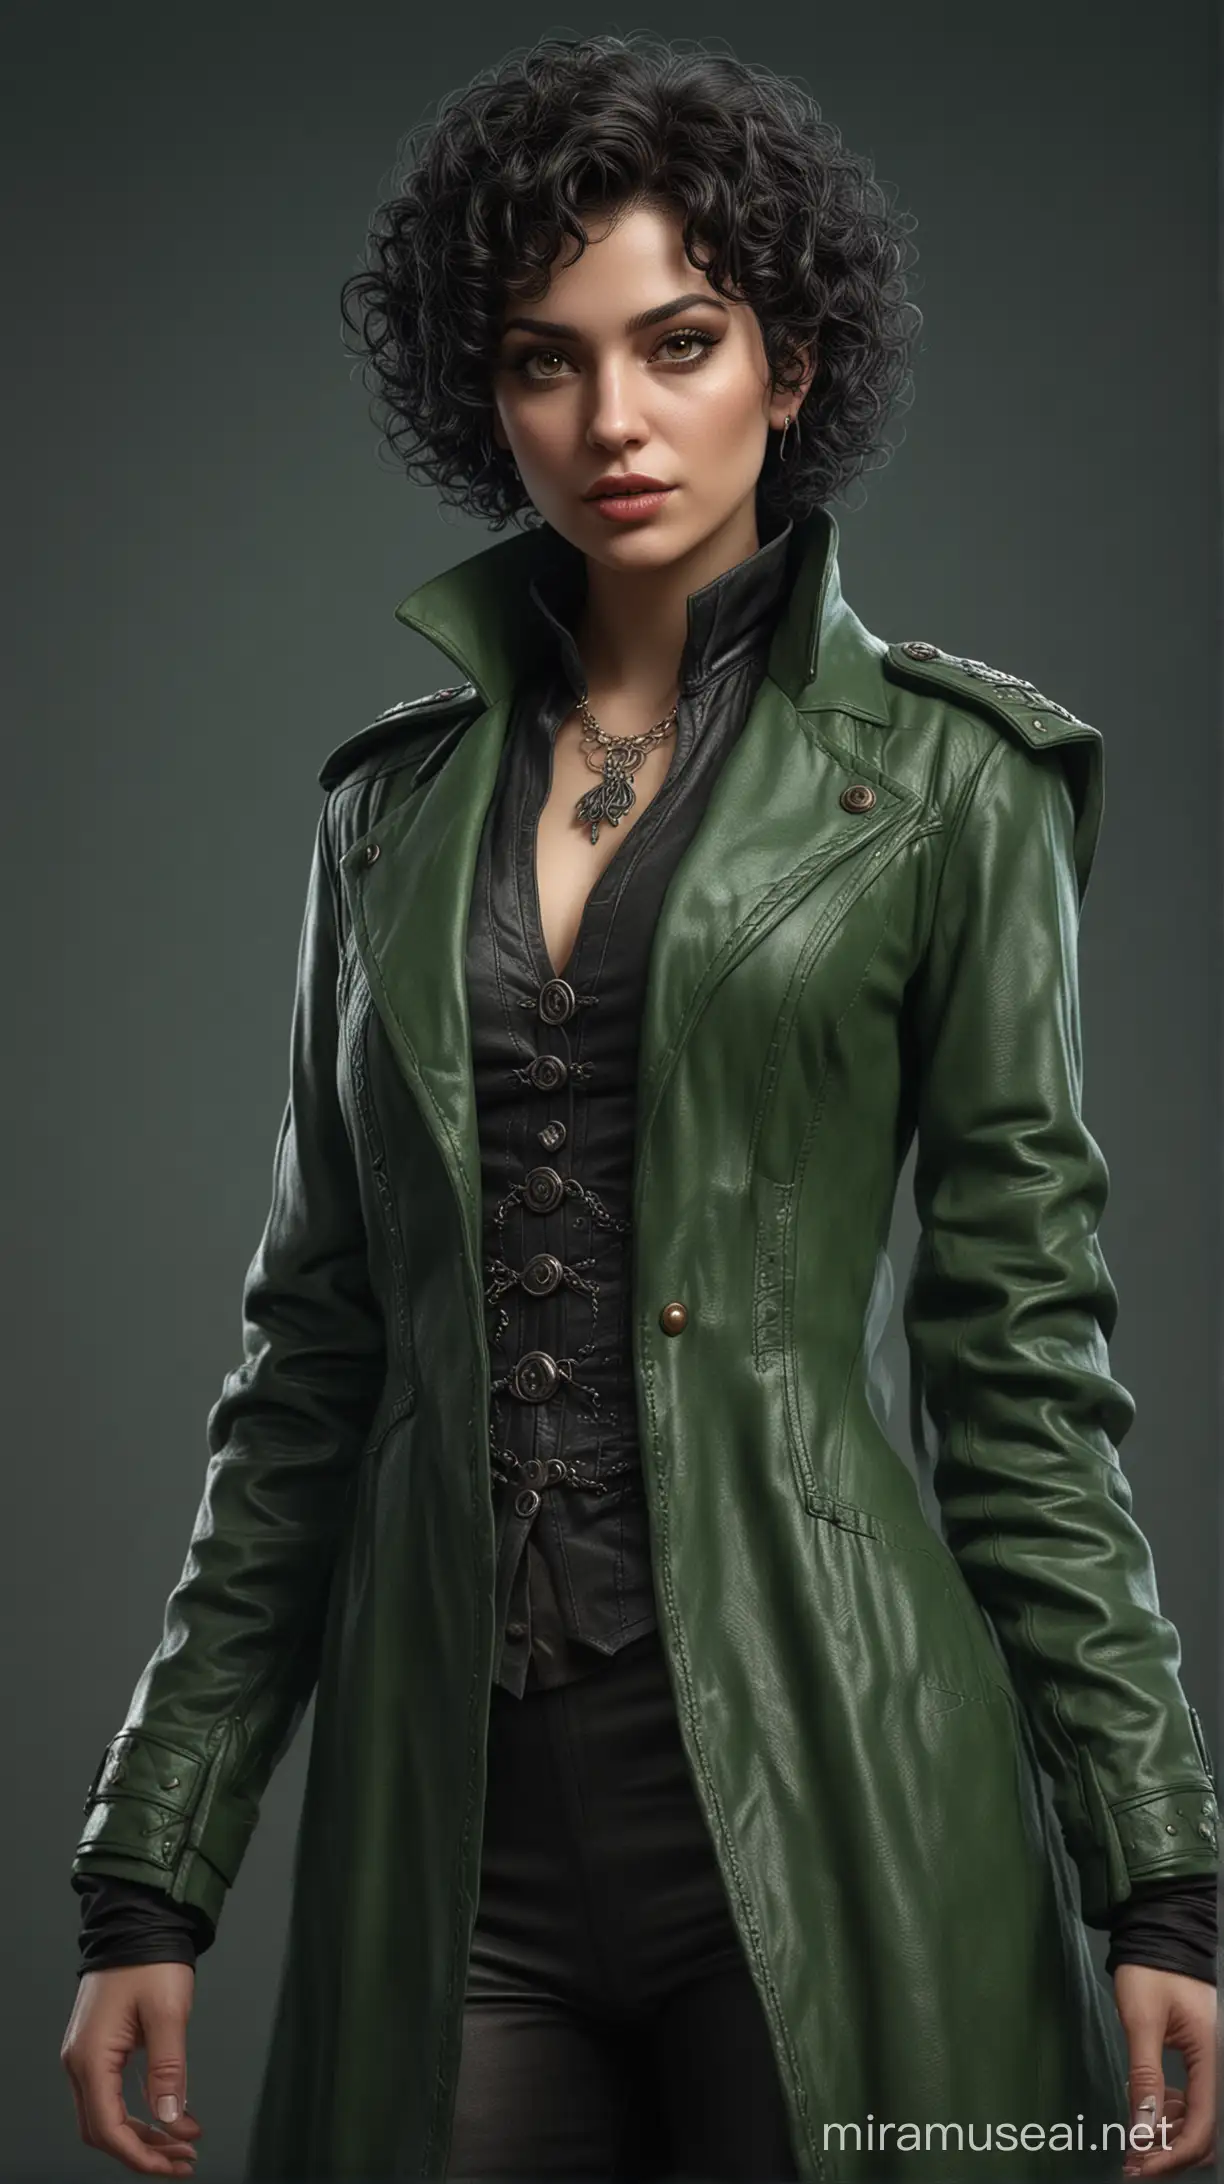 A photorealistic full-body picture of a beautiful female necromancer wizard with short black curly hair, brown eyes, big lips, green leather coat